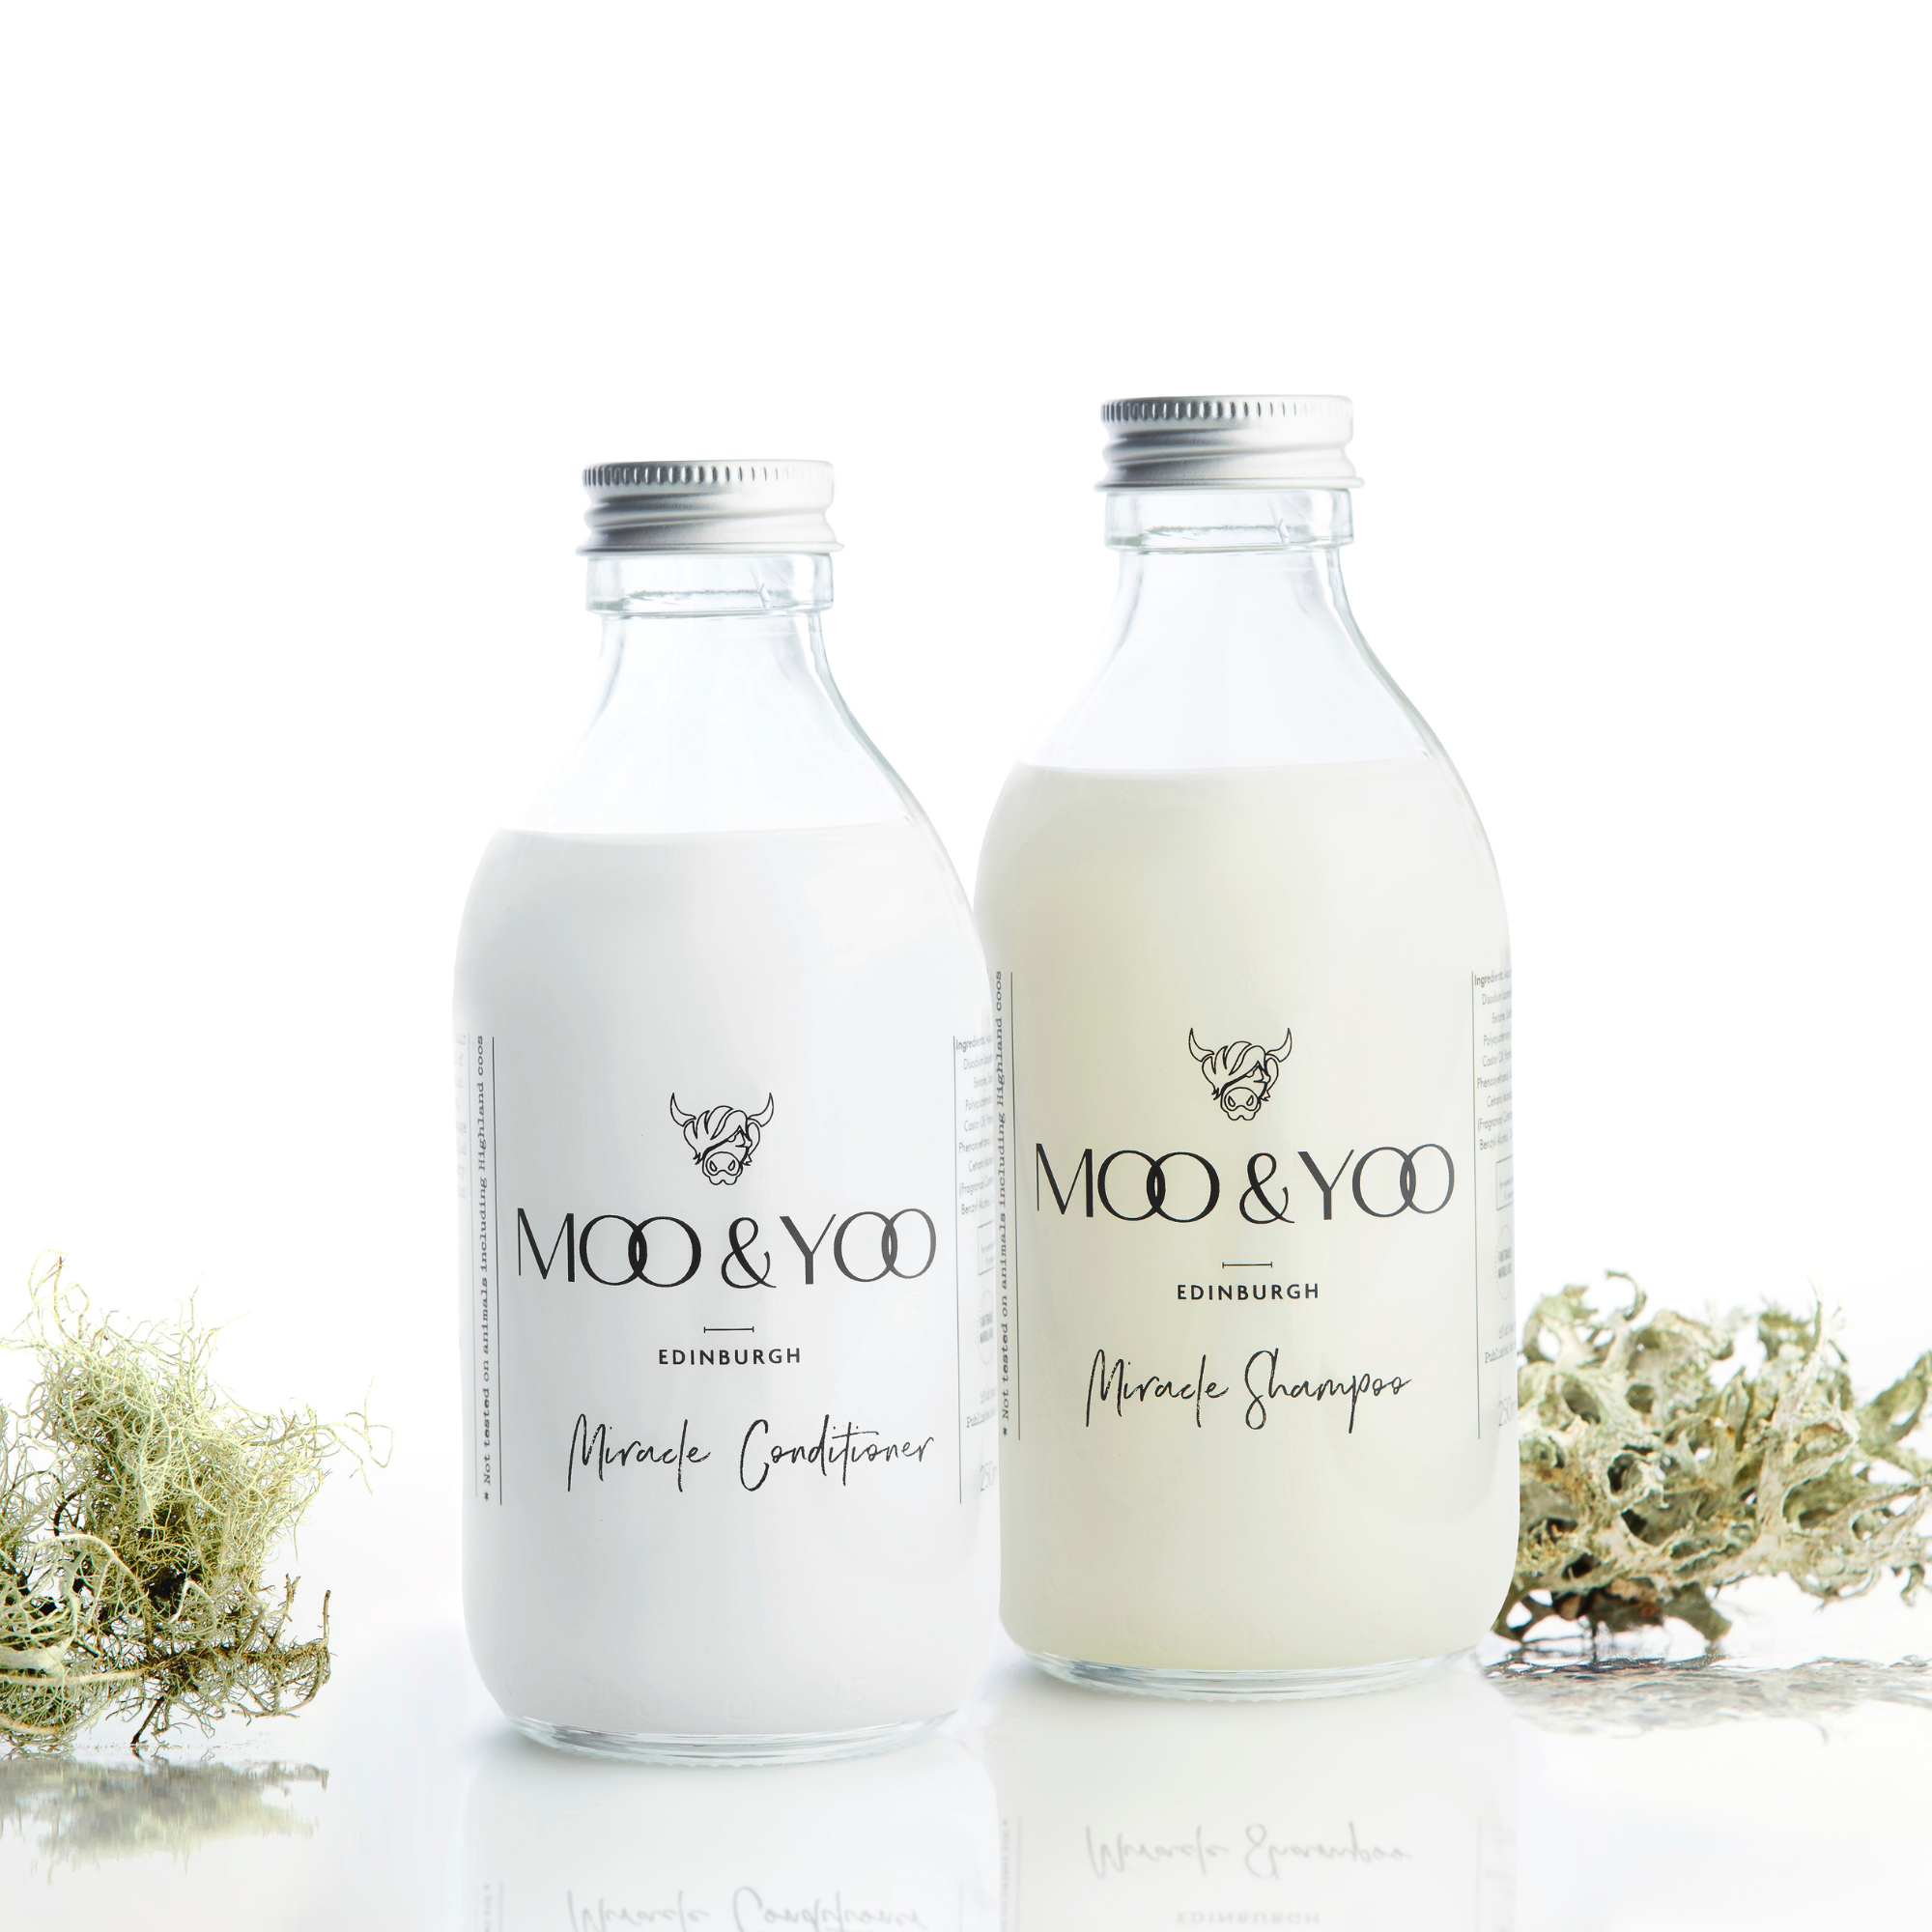 A glass bottle of Moo and Yoo Miracle Conditioner and a glass bottle of Moo and Yoo Miracle Shampoo sitting side by side with aluminium lids on a white background with a sprig of Icelandic moss placed to each side.